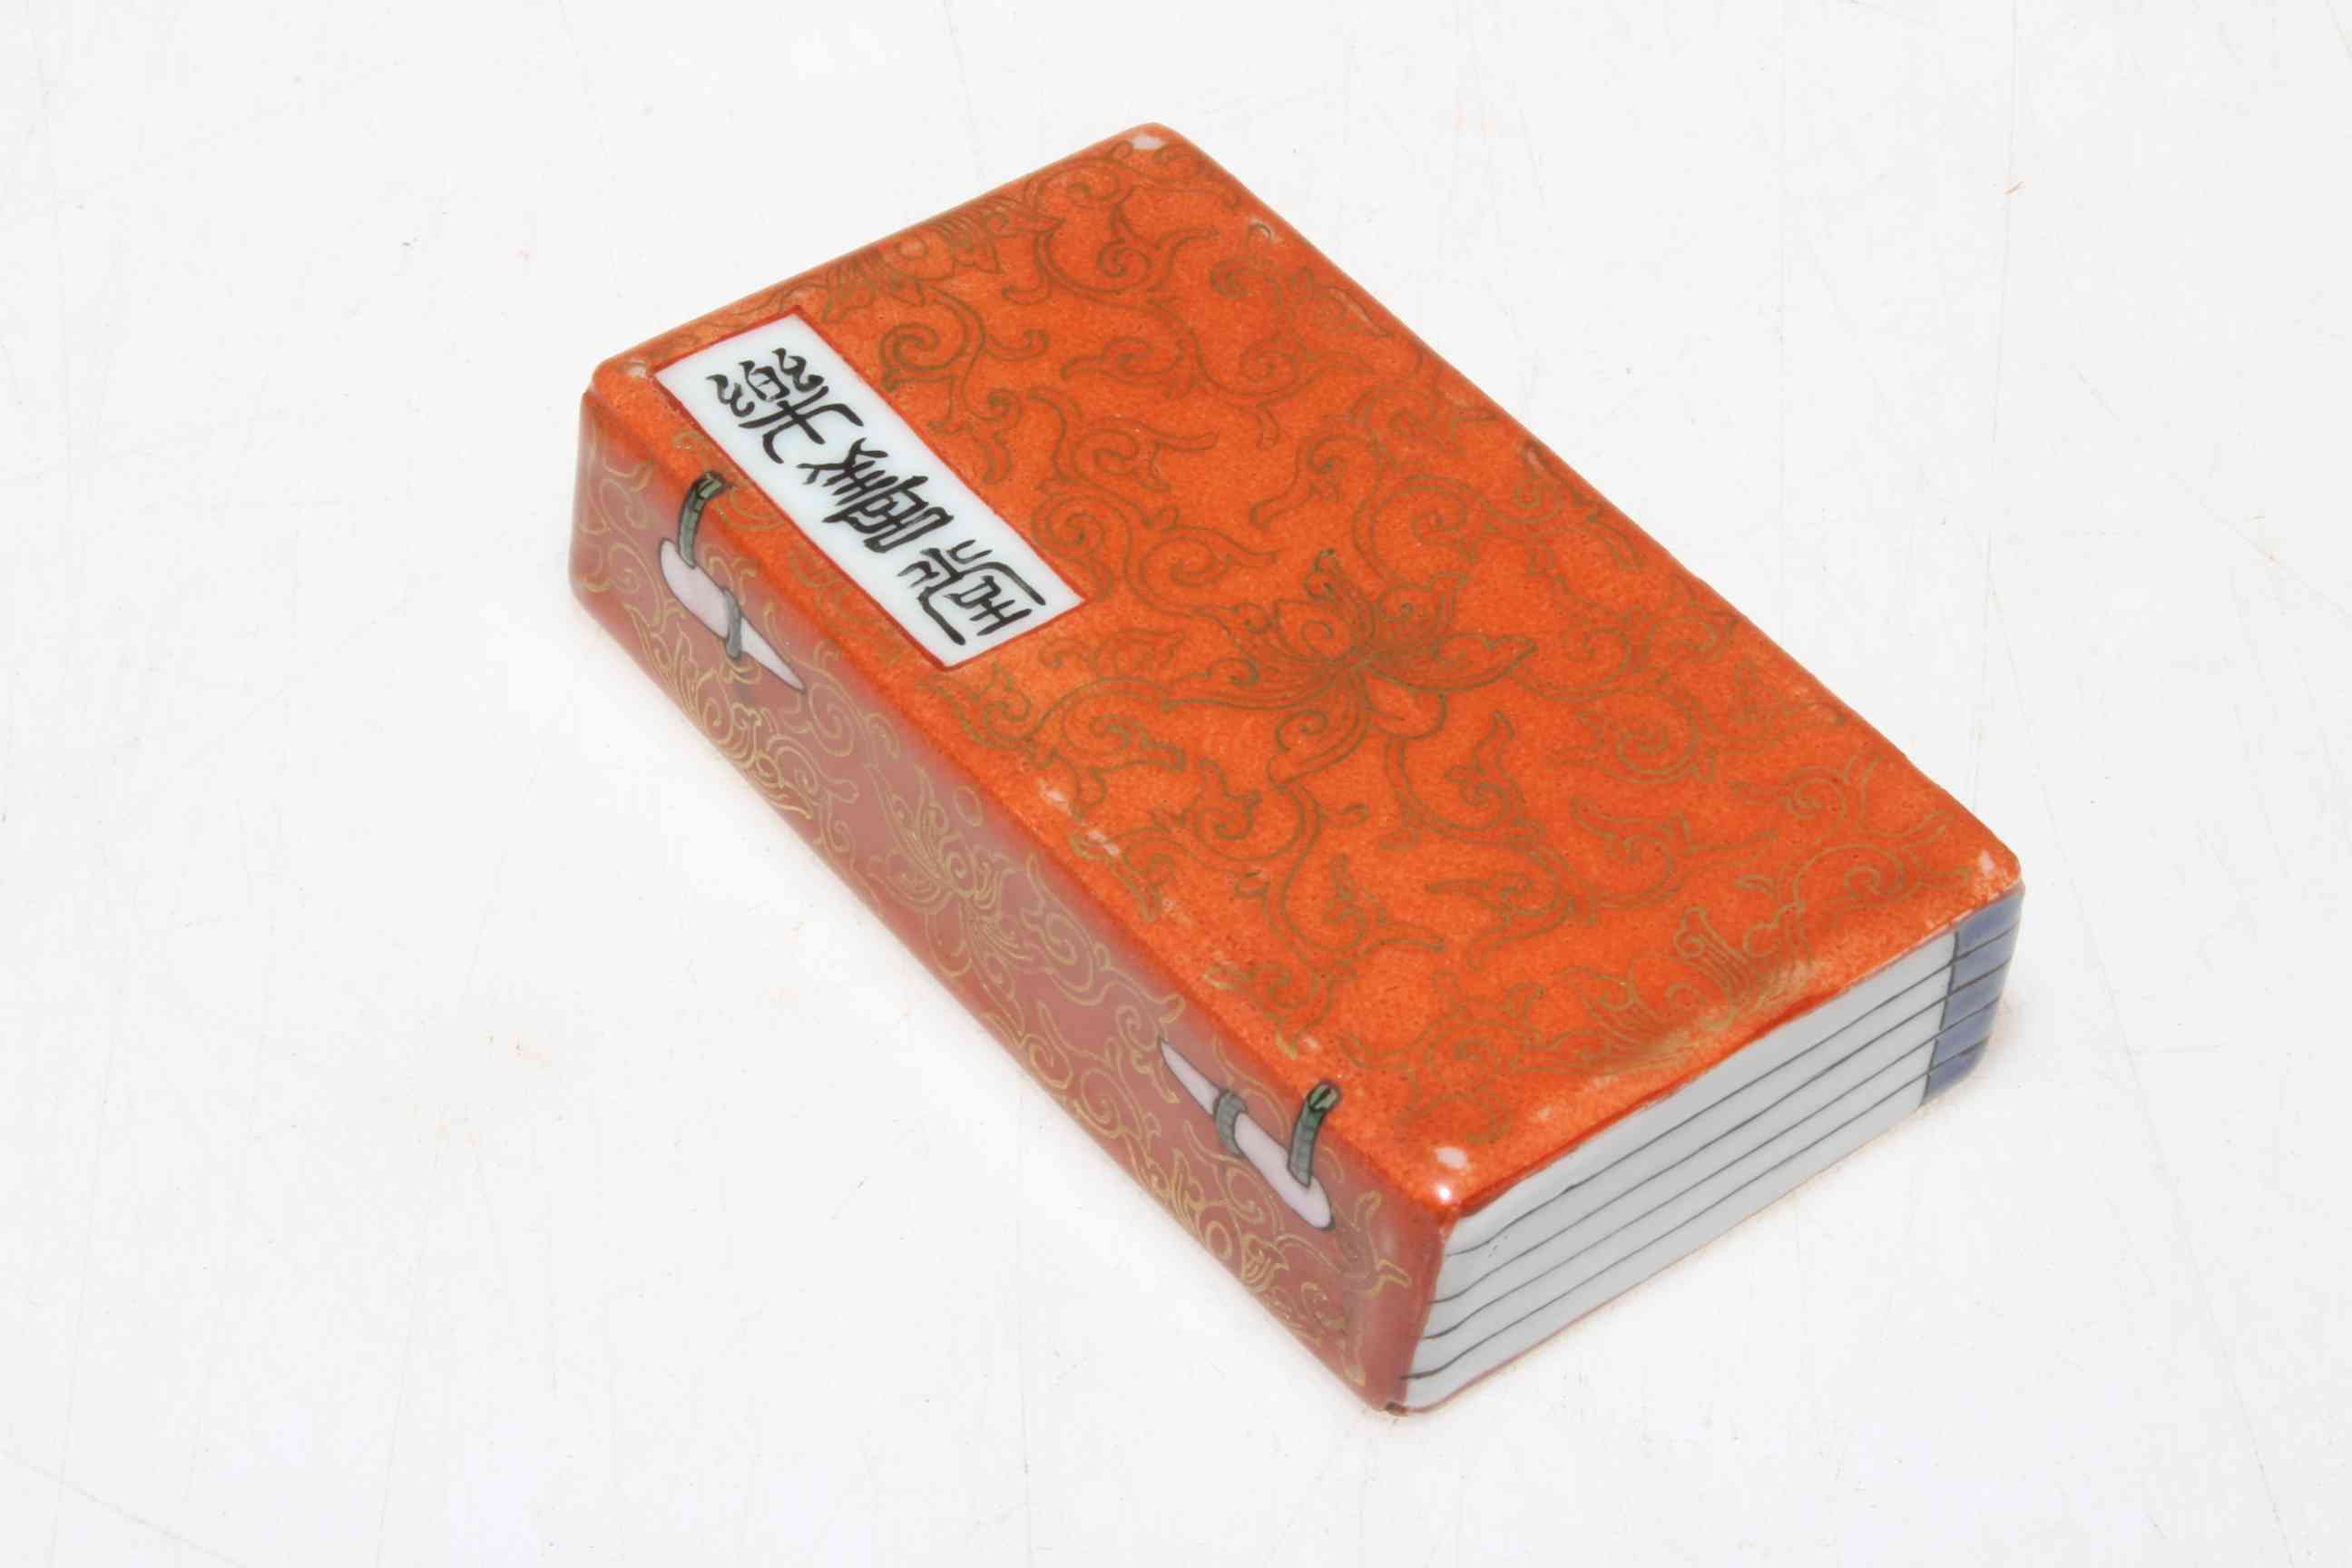 Small Chinese porcelain book, 8.5cm by 5cm.